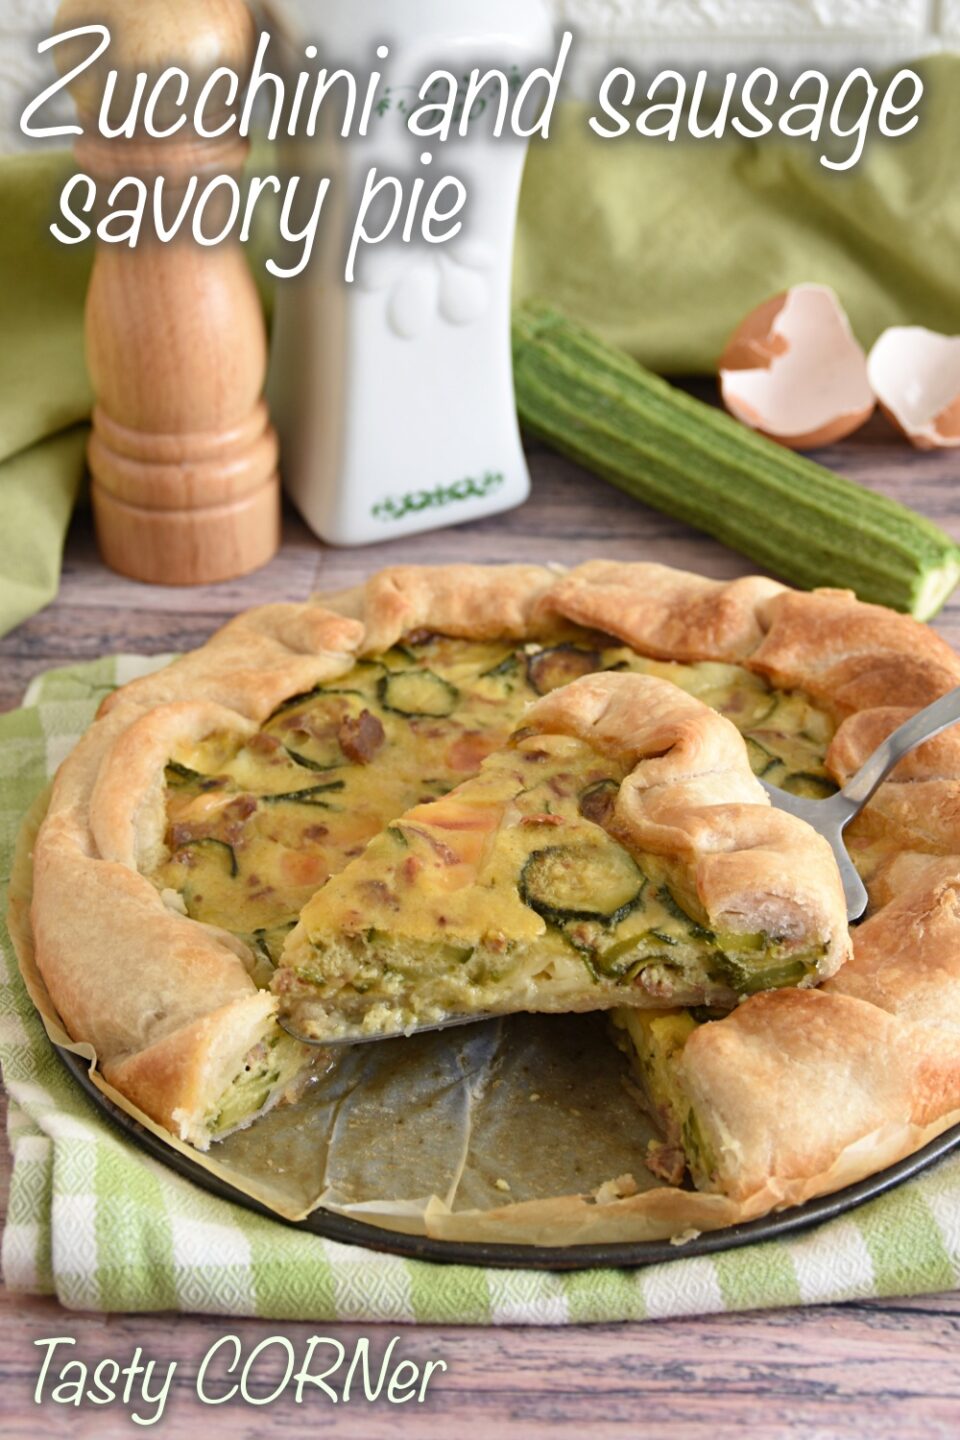 en_v_ zucchini and sausage savory pie with puff pastry easy recipe by tasty corner